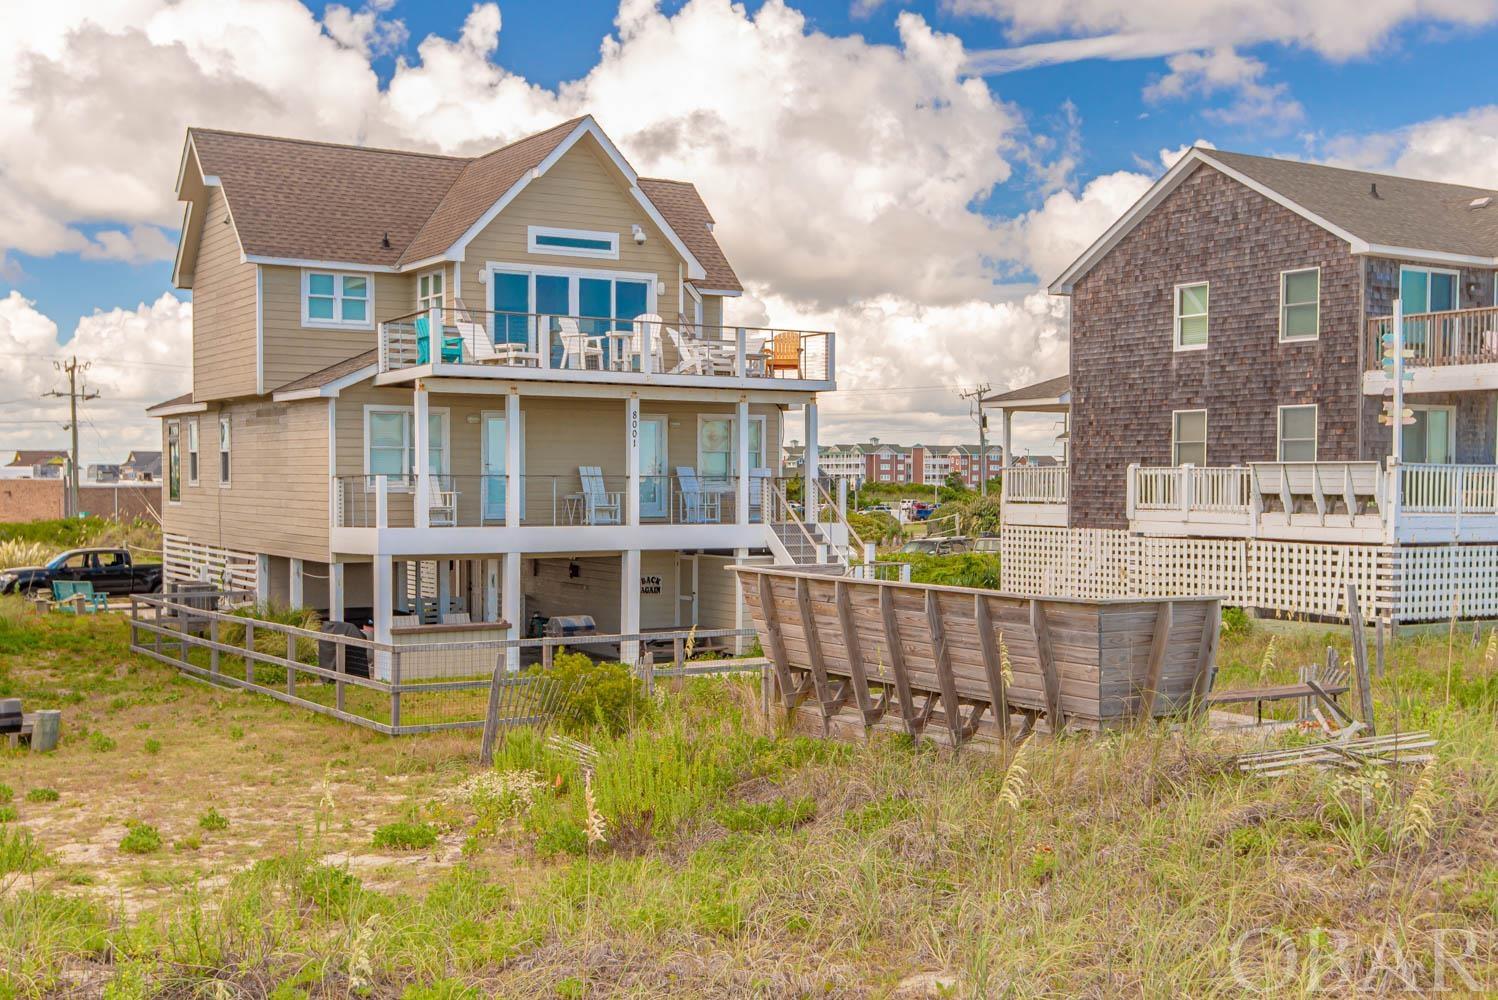 ONE OF A KIND!!!  This immaculate oceanfront home is truly an Outer Banks GEM!  From the awesome location to the ocean views to the luxury interior, you will find no better place to be to enjoy all that the Outer Banks has to offer.  The interior has no match with its exposed beams, reclaimed hardwood floors, spectacular artwork and it's luxurious furnishings.  The kitchen is complete with granite countertops and stainless steel appliances and gas range.  Off the kitchen you will see sliding glass door that opens from both sides and exposes the panoramic views of the Atlantic Ocean. Directly opposite of the sliding doors which open to a very entertaining deck is a private queen guest room with a full bath.  The entire first floor is made for entertaining.  The 2nd floor comes complete with 2 king master suites with full baths and 2 additional guest suites next to an additional guest bathroom suite.  All rooms are furnished with top of line furnishings that give a vibe of coastal living combined with luxury lifestyle like no other.